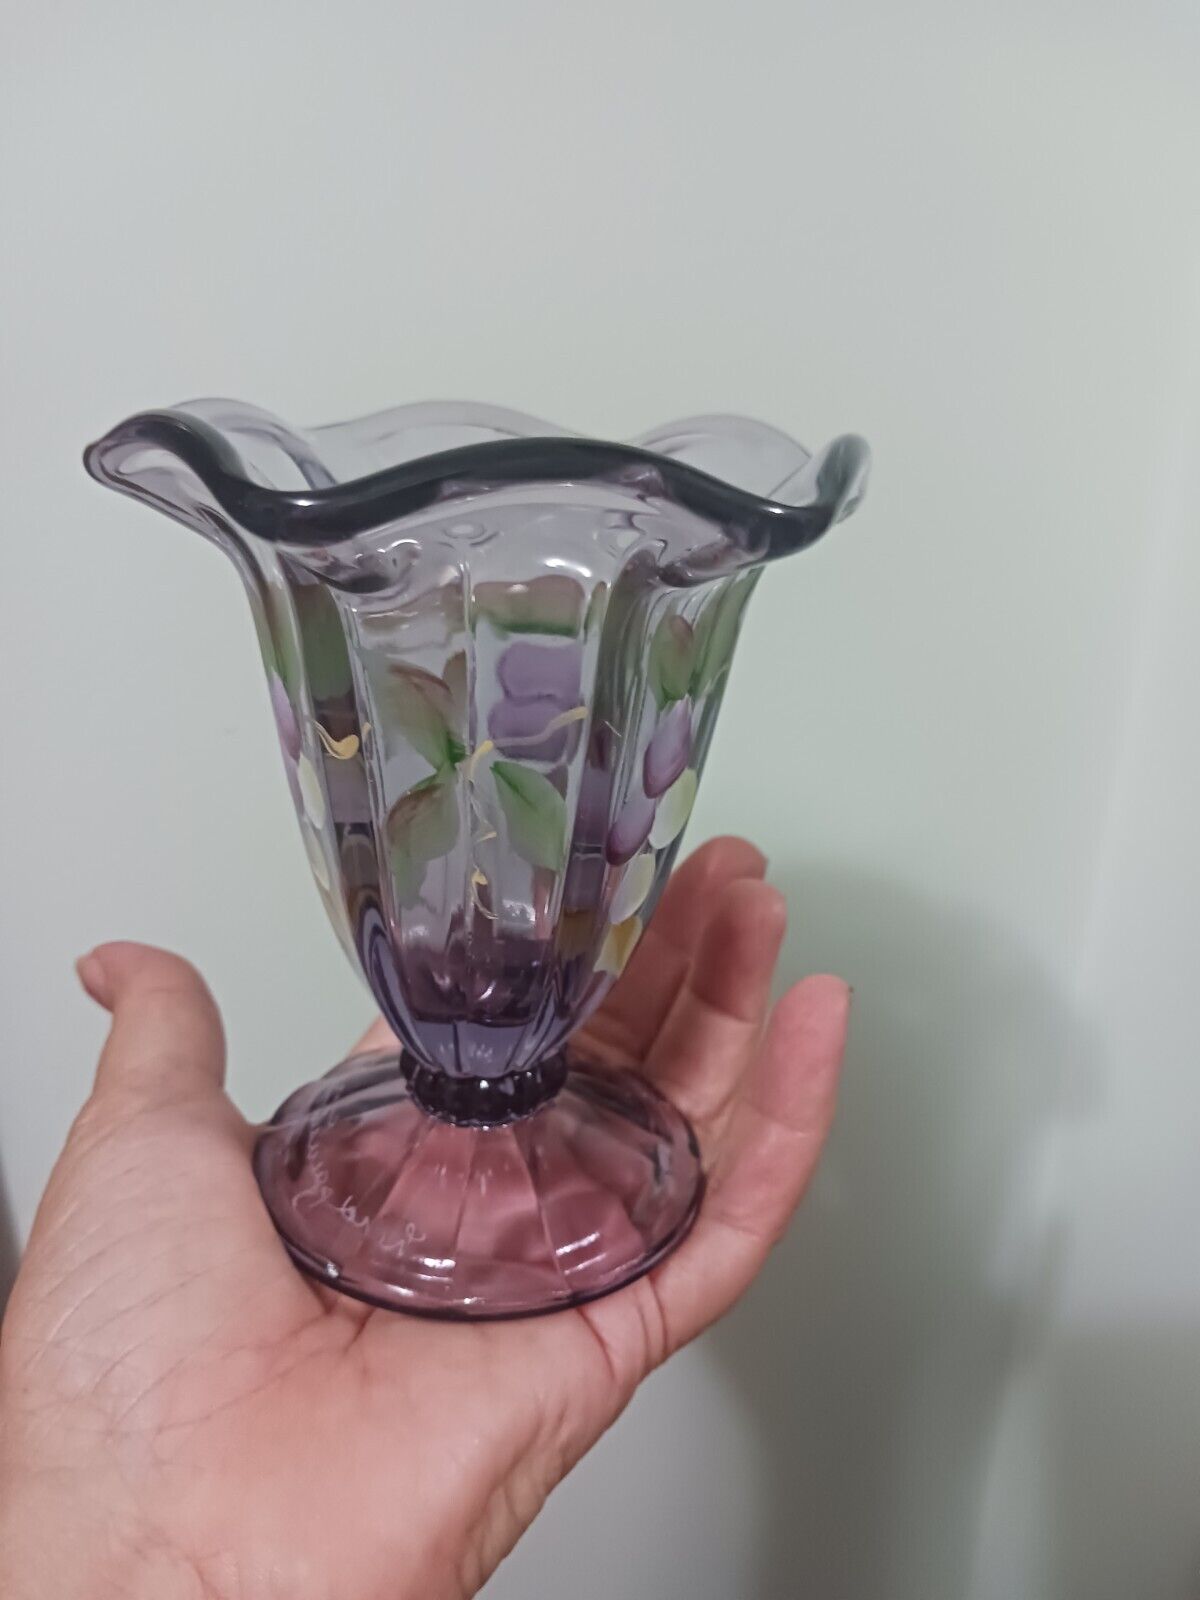 Fenton Glass - Grape Arber On Violet  - Footed Vase - L. Everson Hand Painted